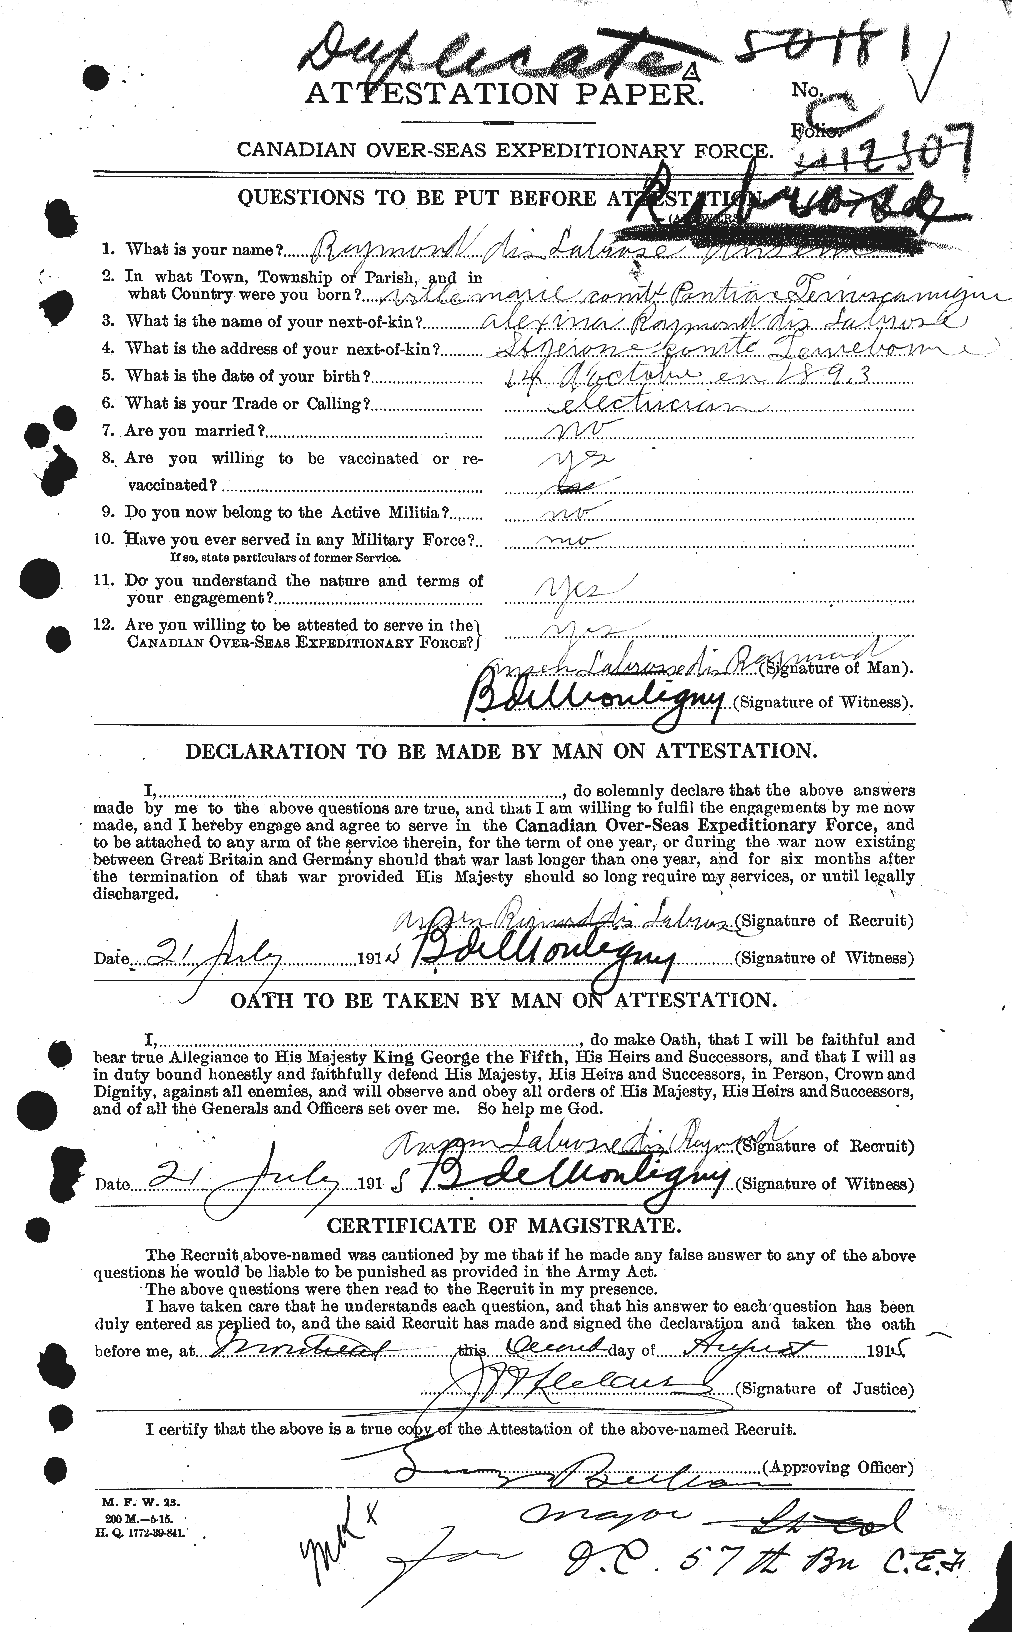 Personnel Records of the First World War - CEF 444298a